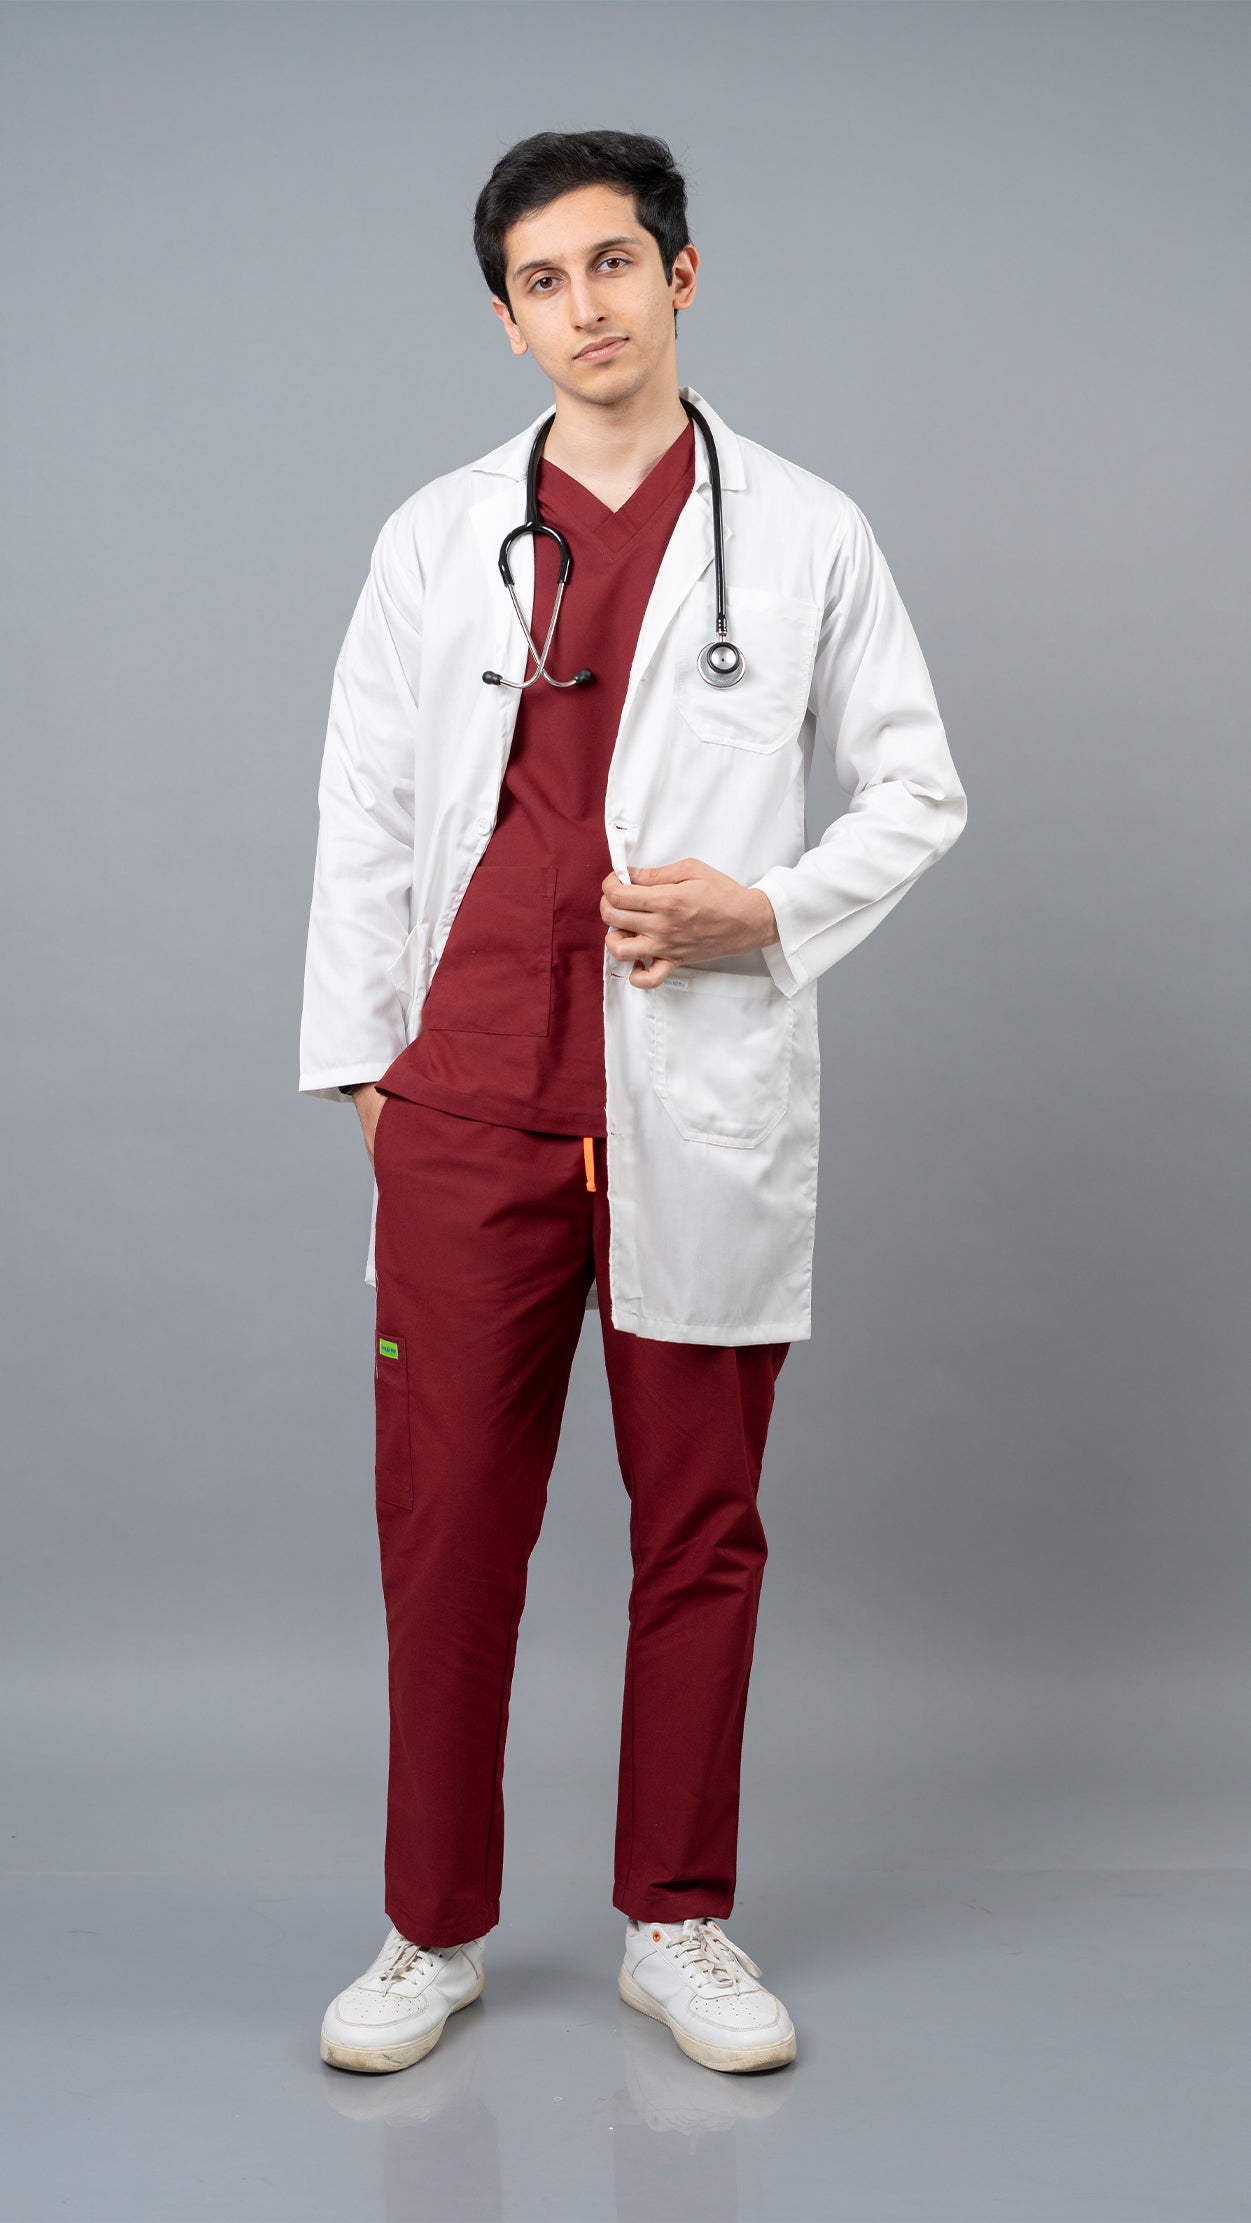 VastraMedwear Full Sleeves Knee length Lab Coat/ Apron for Chemistry Lab and Medical Students Men